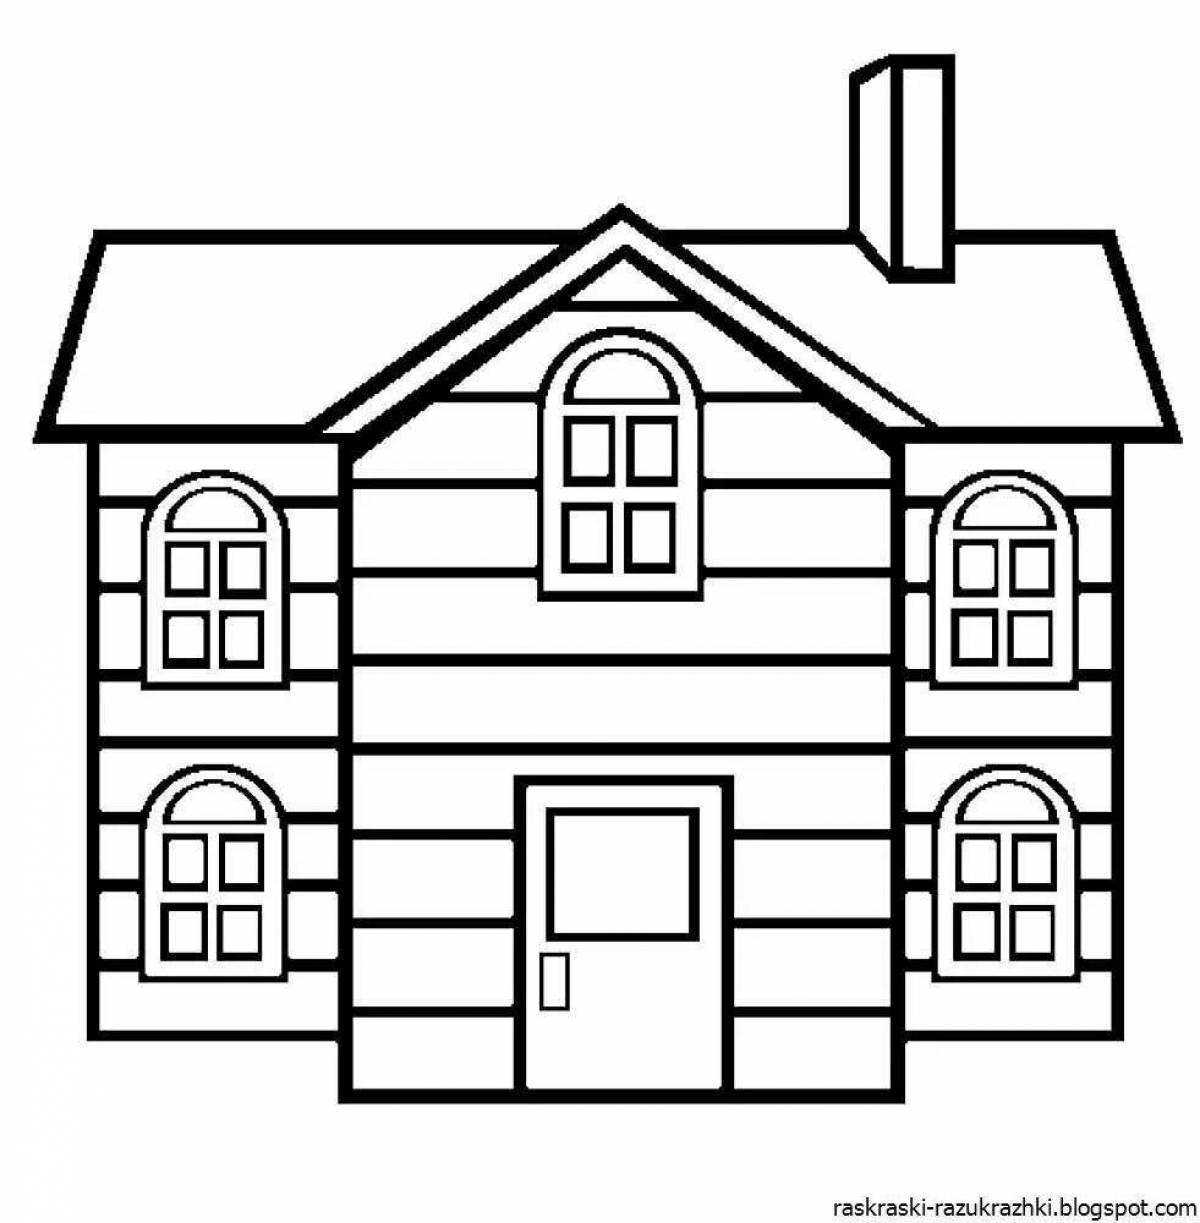 Wonderful houses coloring for kids